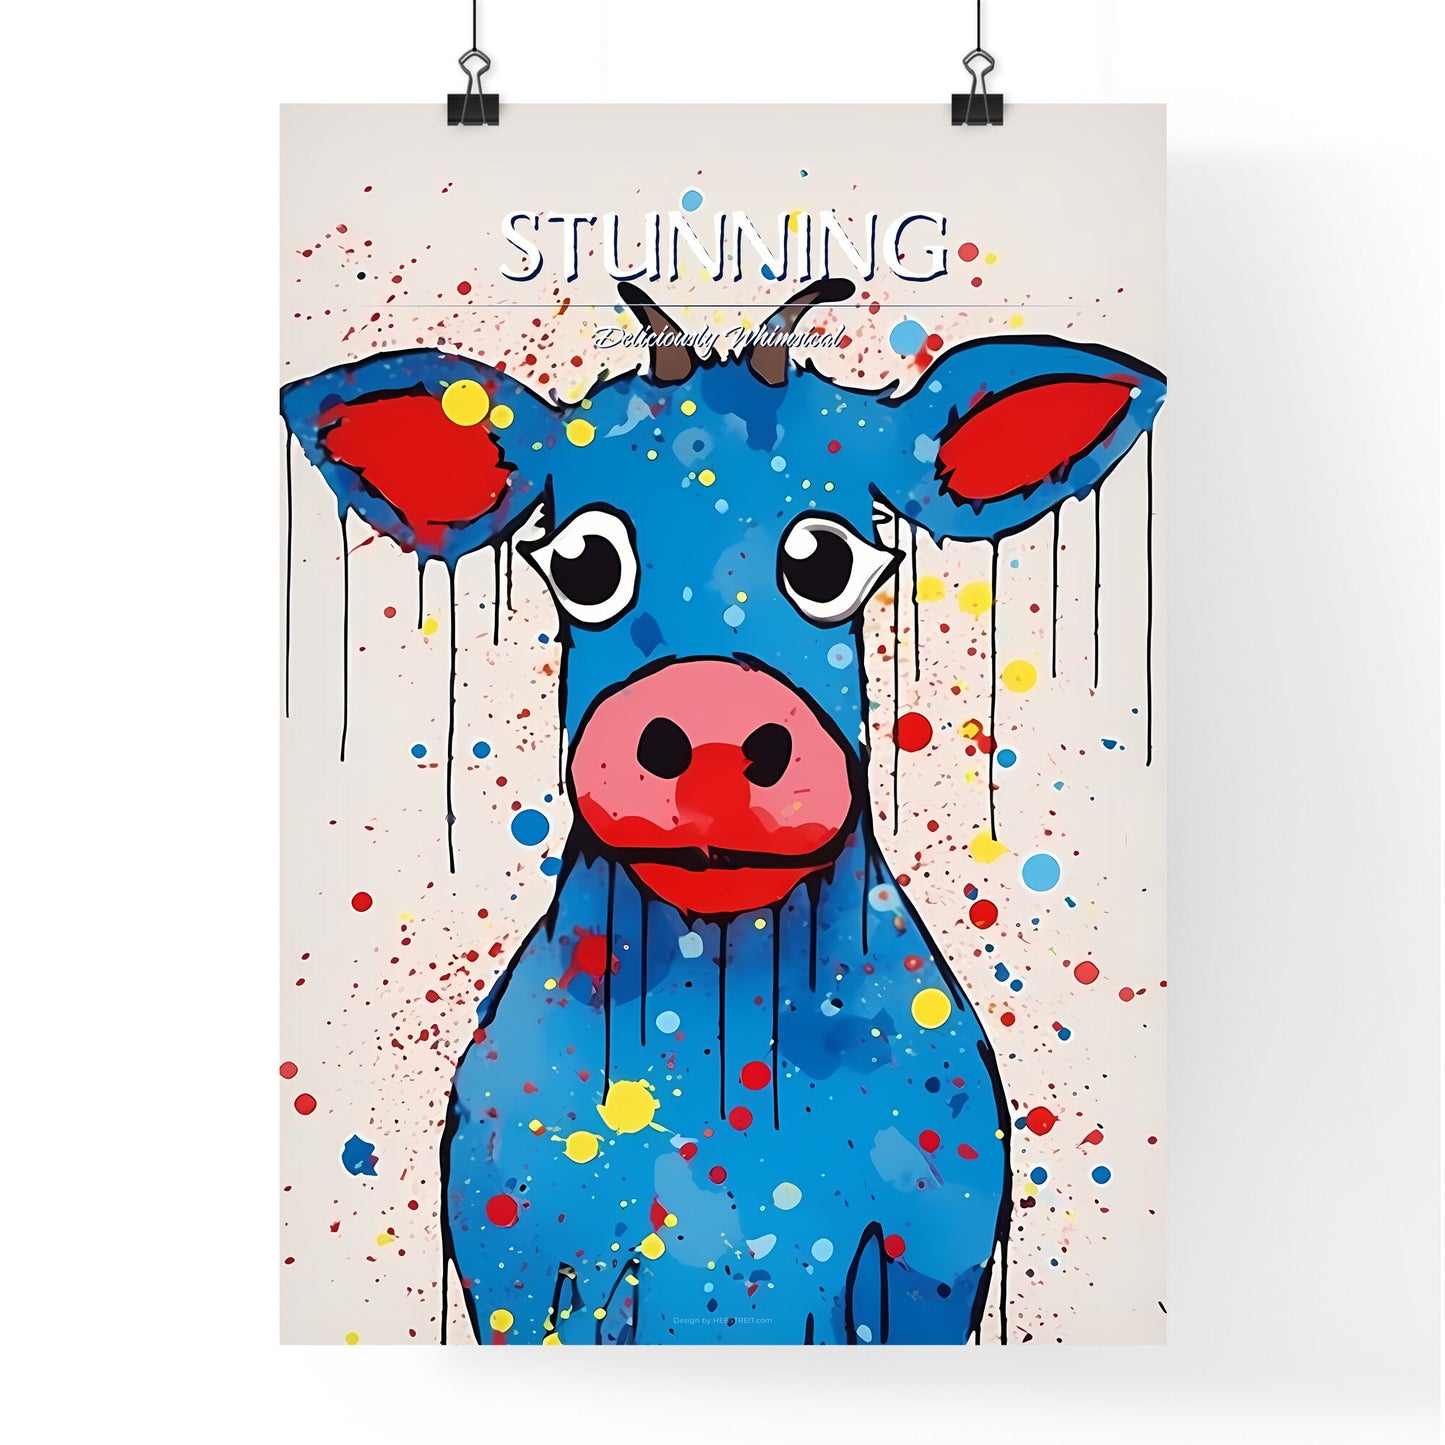 A Poster of minimalist pig art - A Blue Cow With Red Lips And Horns Default Title